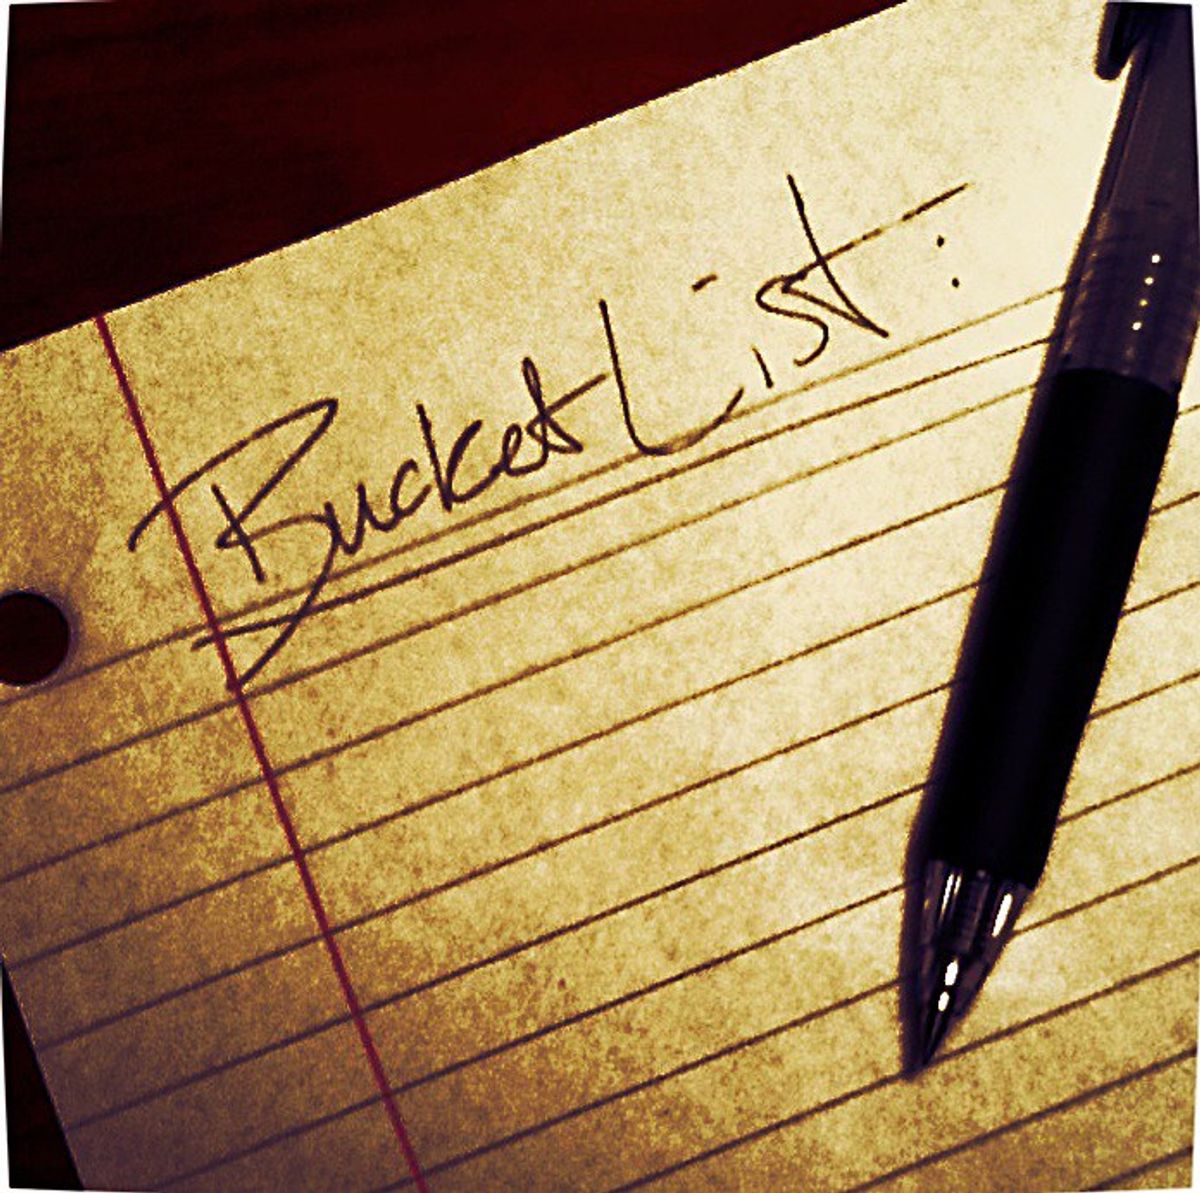 The Bucket List Project